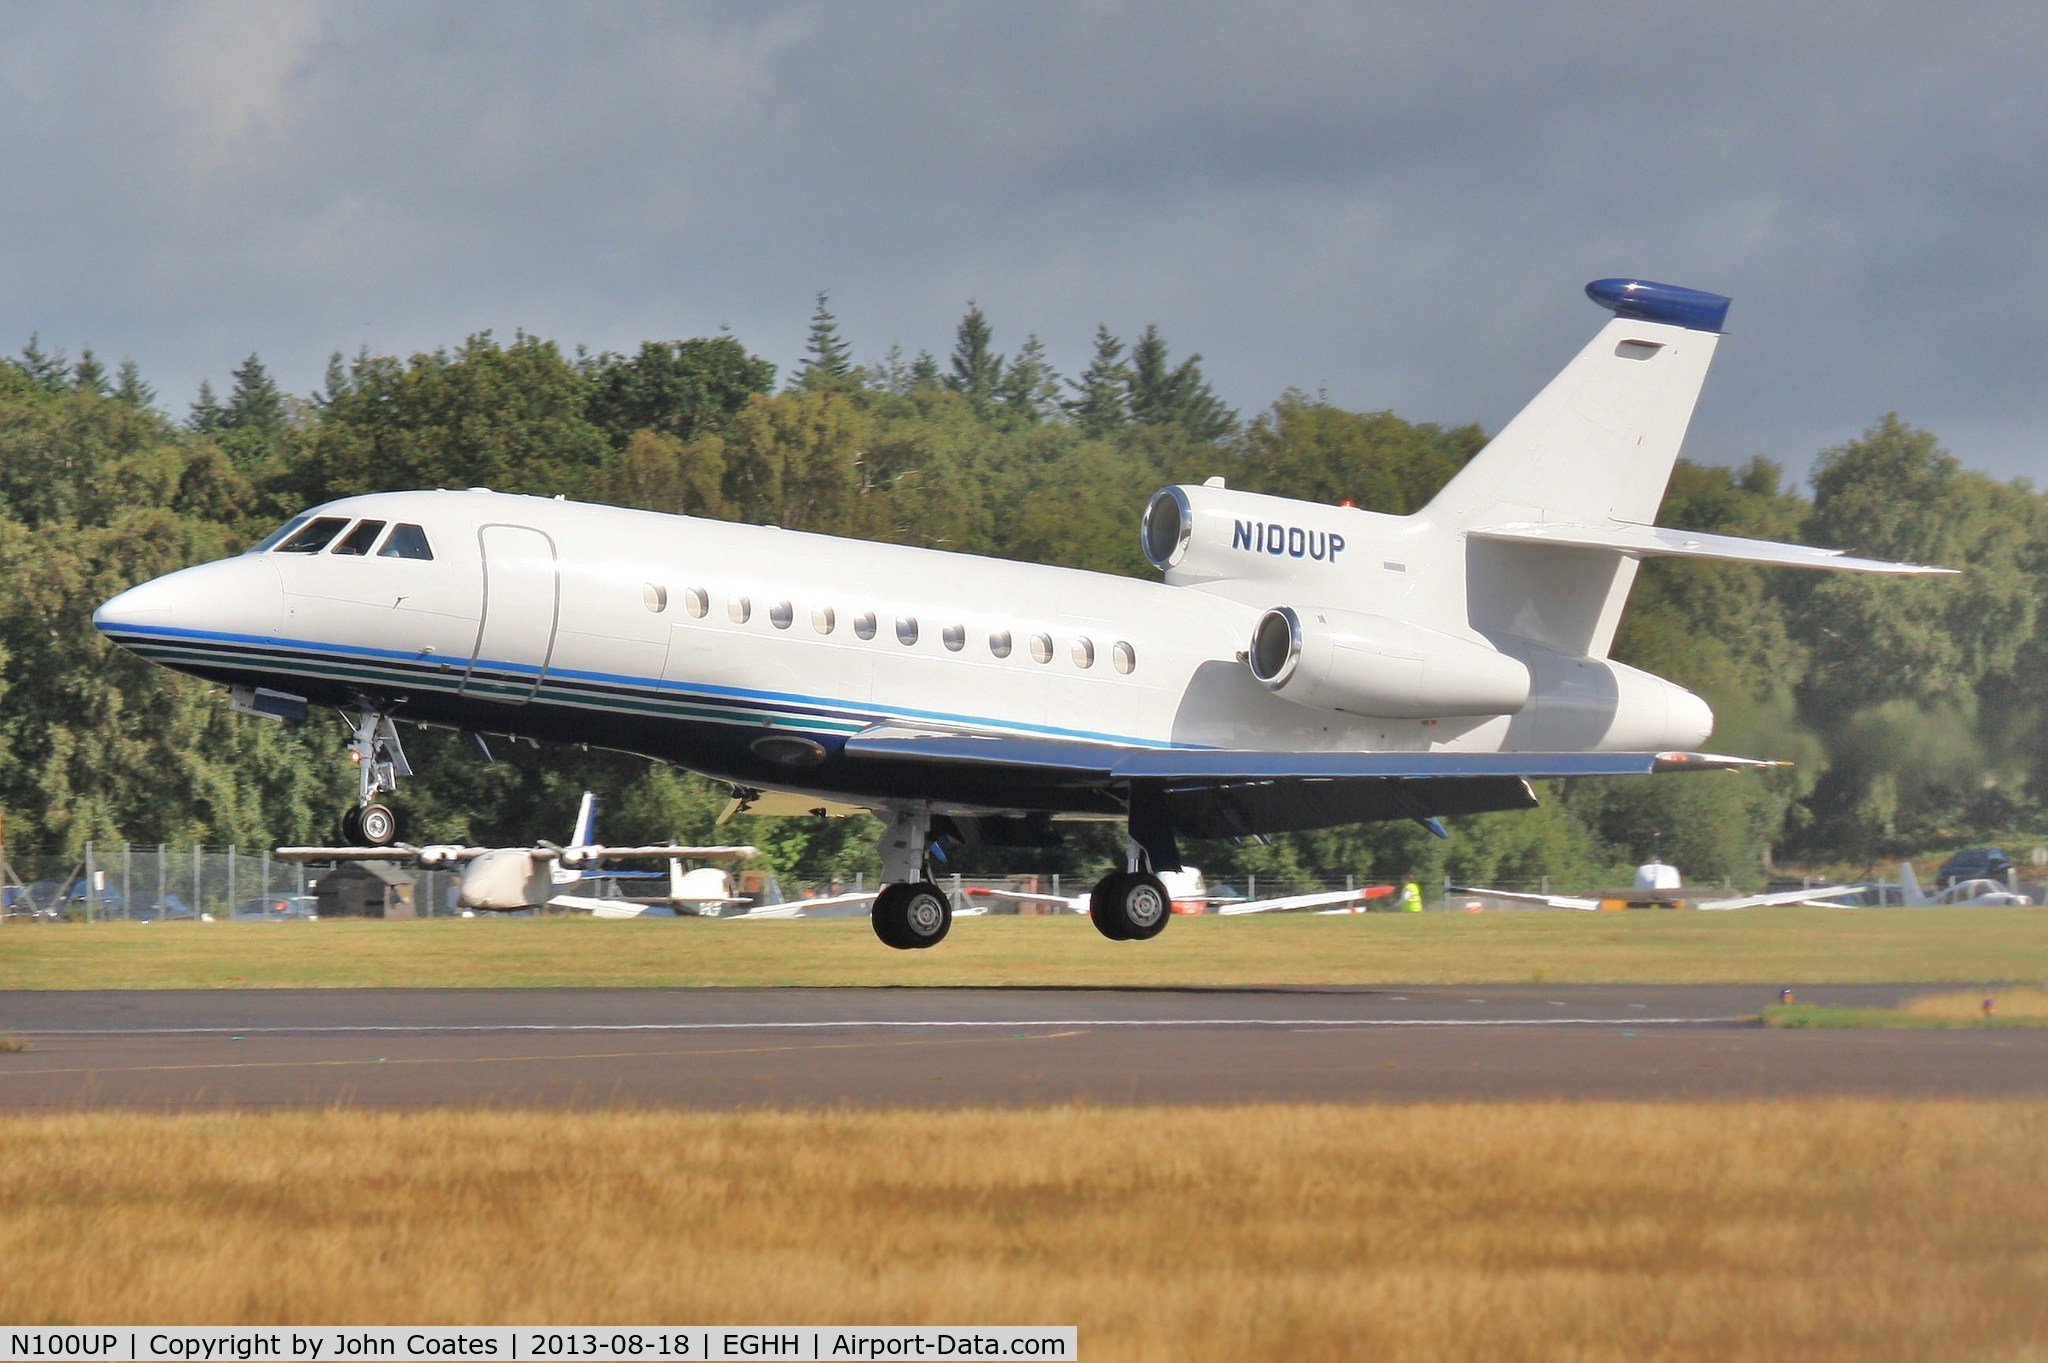 N100UP, 1988 Dassault Falcon 900 C/N 44, About to touchdown on 26